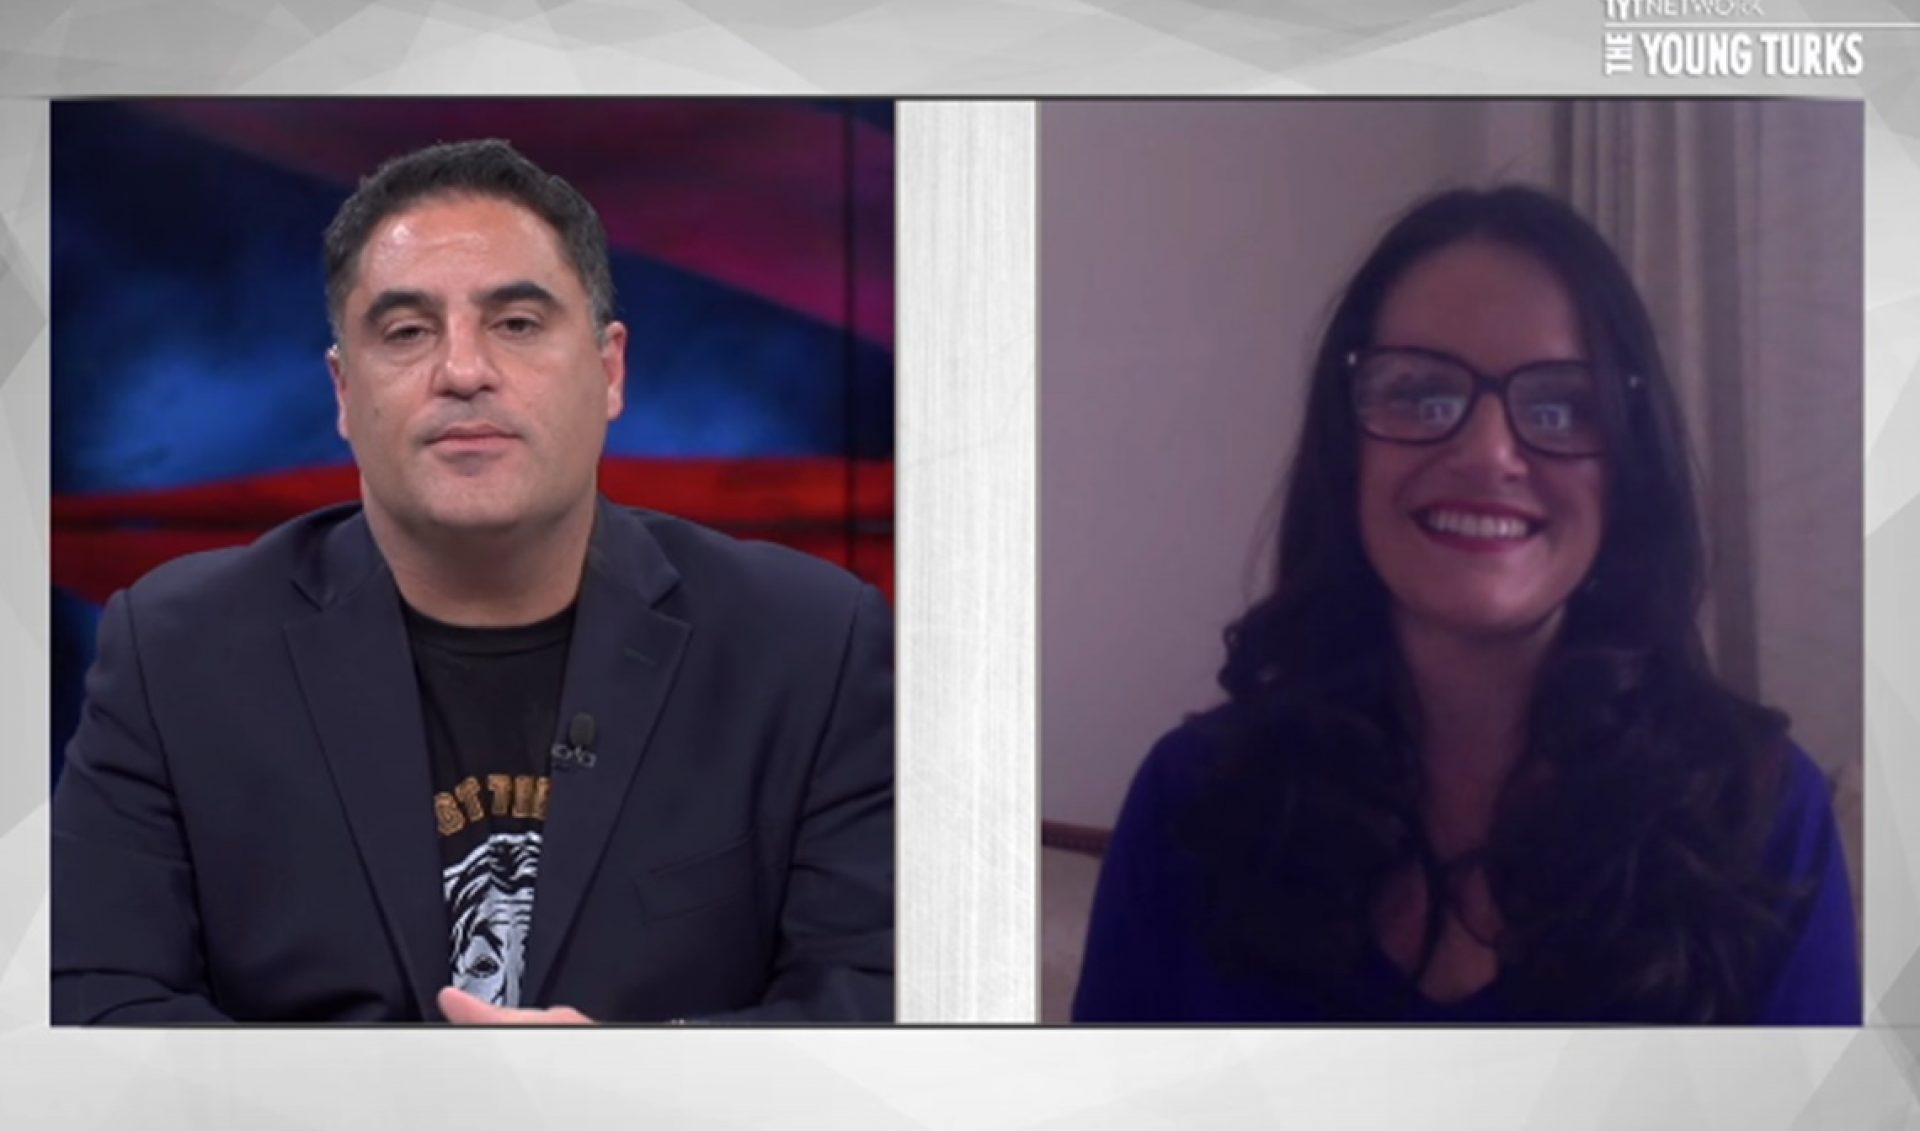 The Young Turks, $500,000 Into $2 Million Goal, Add Nomiki Konst And Shaun King